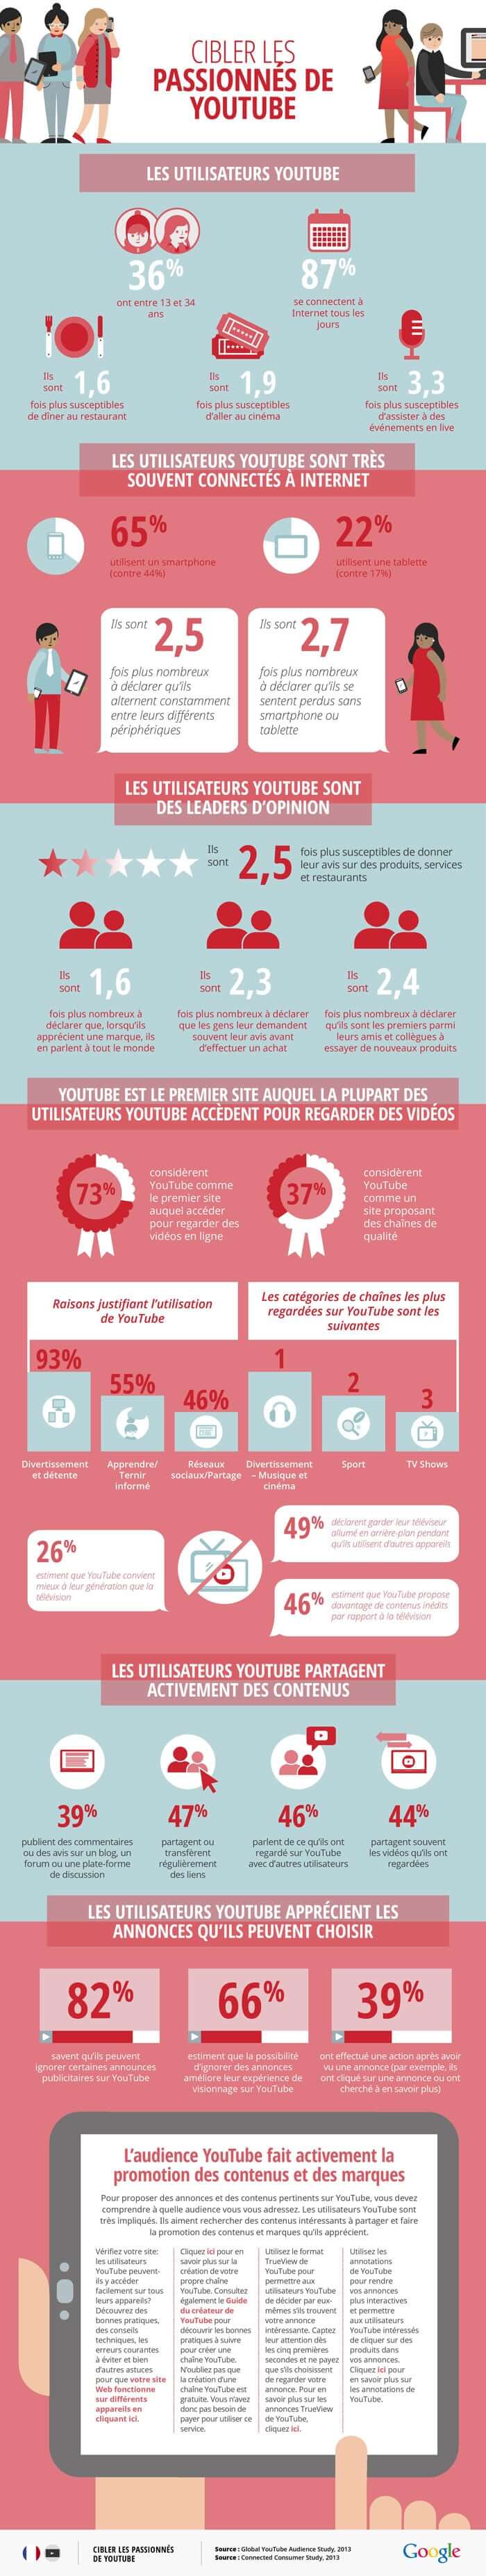 YouTube-Infographic-France